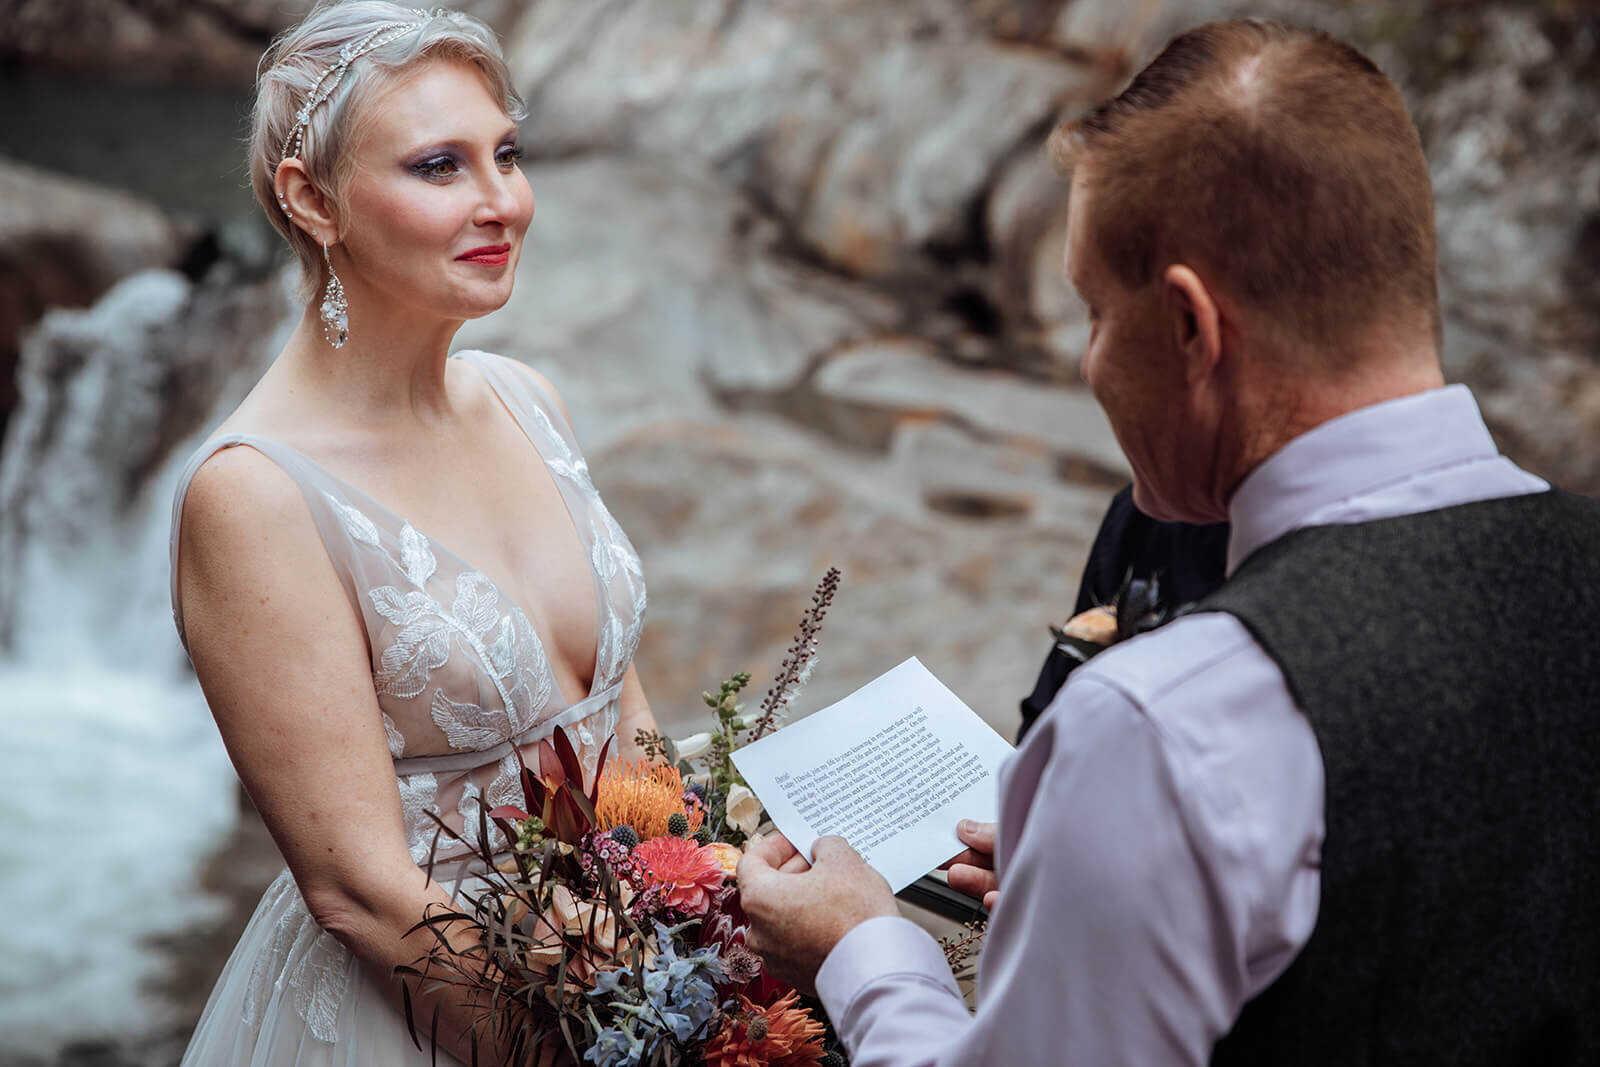  Bride reacts to grooms vows at Warren Falls, VT 